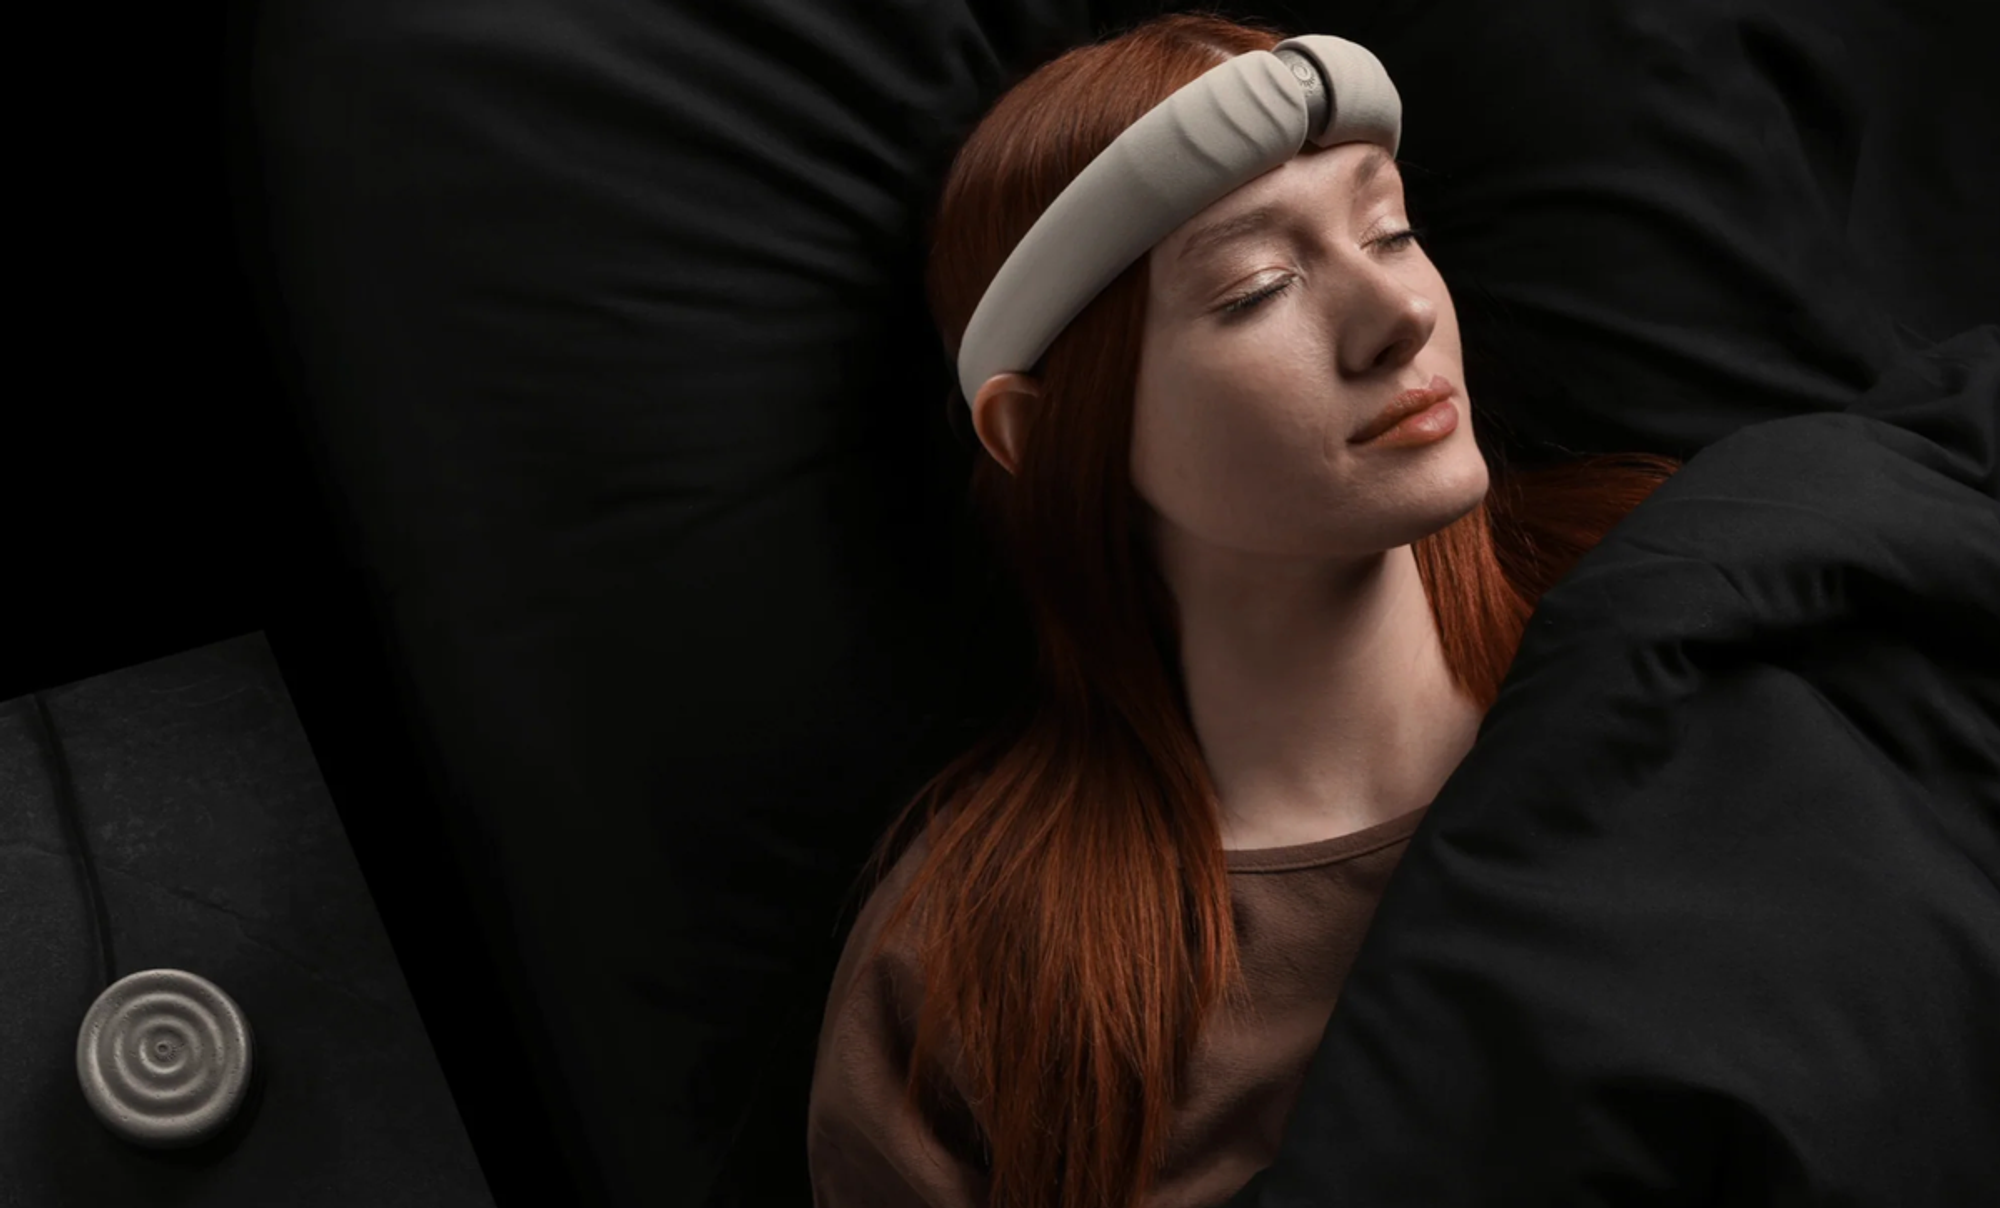 A new AI model called Morpheus-1 claims to induce lucid dreaming